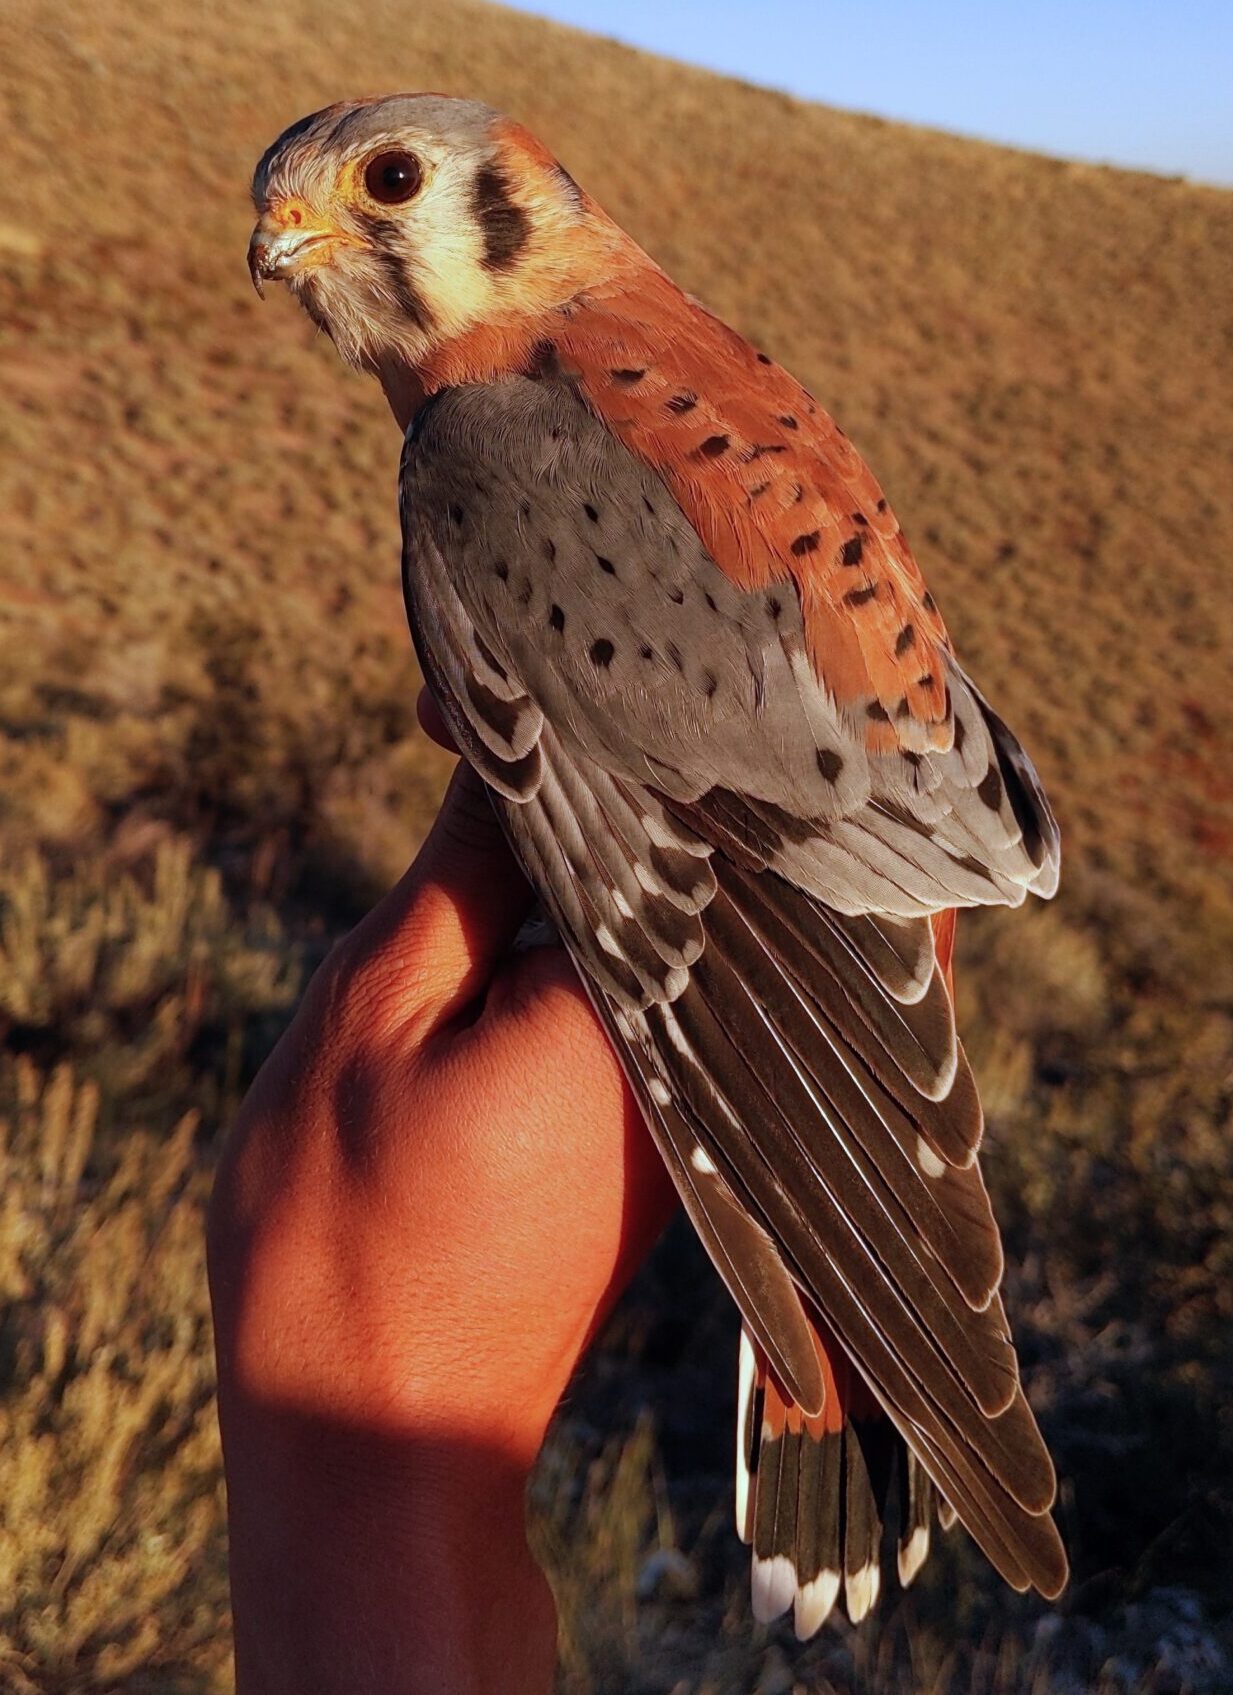 A raptor bander gently holds a small falcon with a rusty reddish colored back and steel blue-grey wings in the light of the setting sun. There is some blue sky and Lucky Peak's brownish hillside in the background.